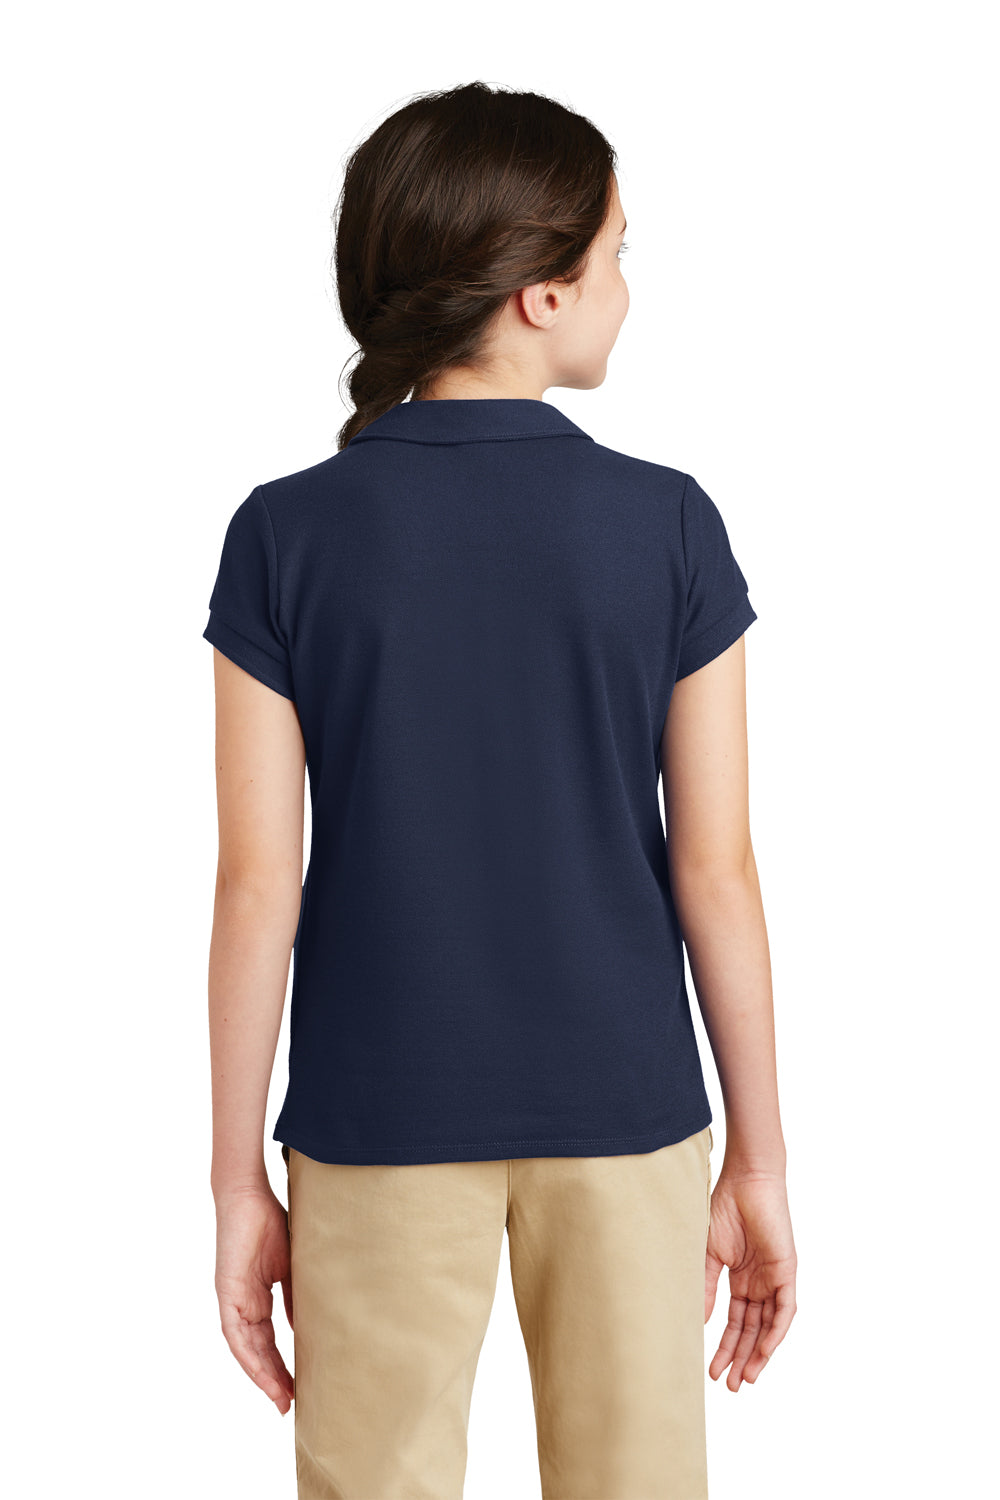 Port Authority YG503 Youth Silk Touch Wrinkle Resistant Short Sleeve Polo Shirt Navy Blue Back